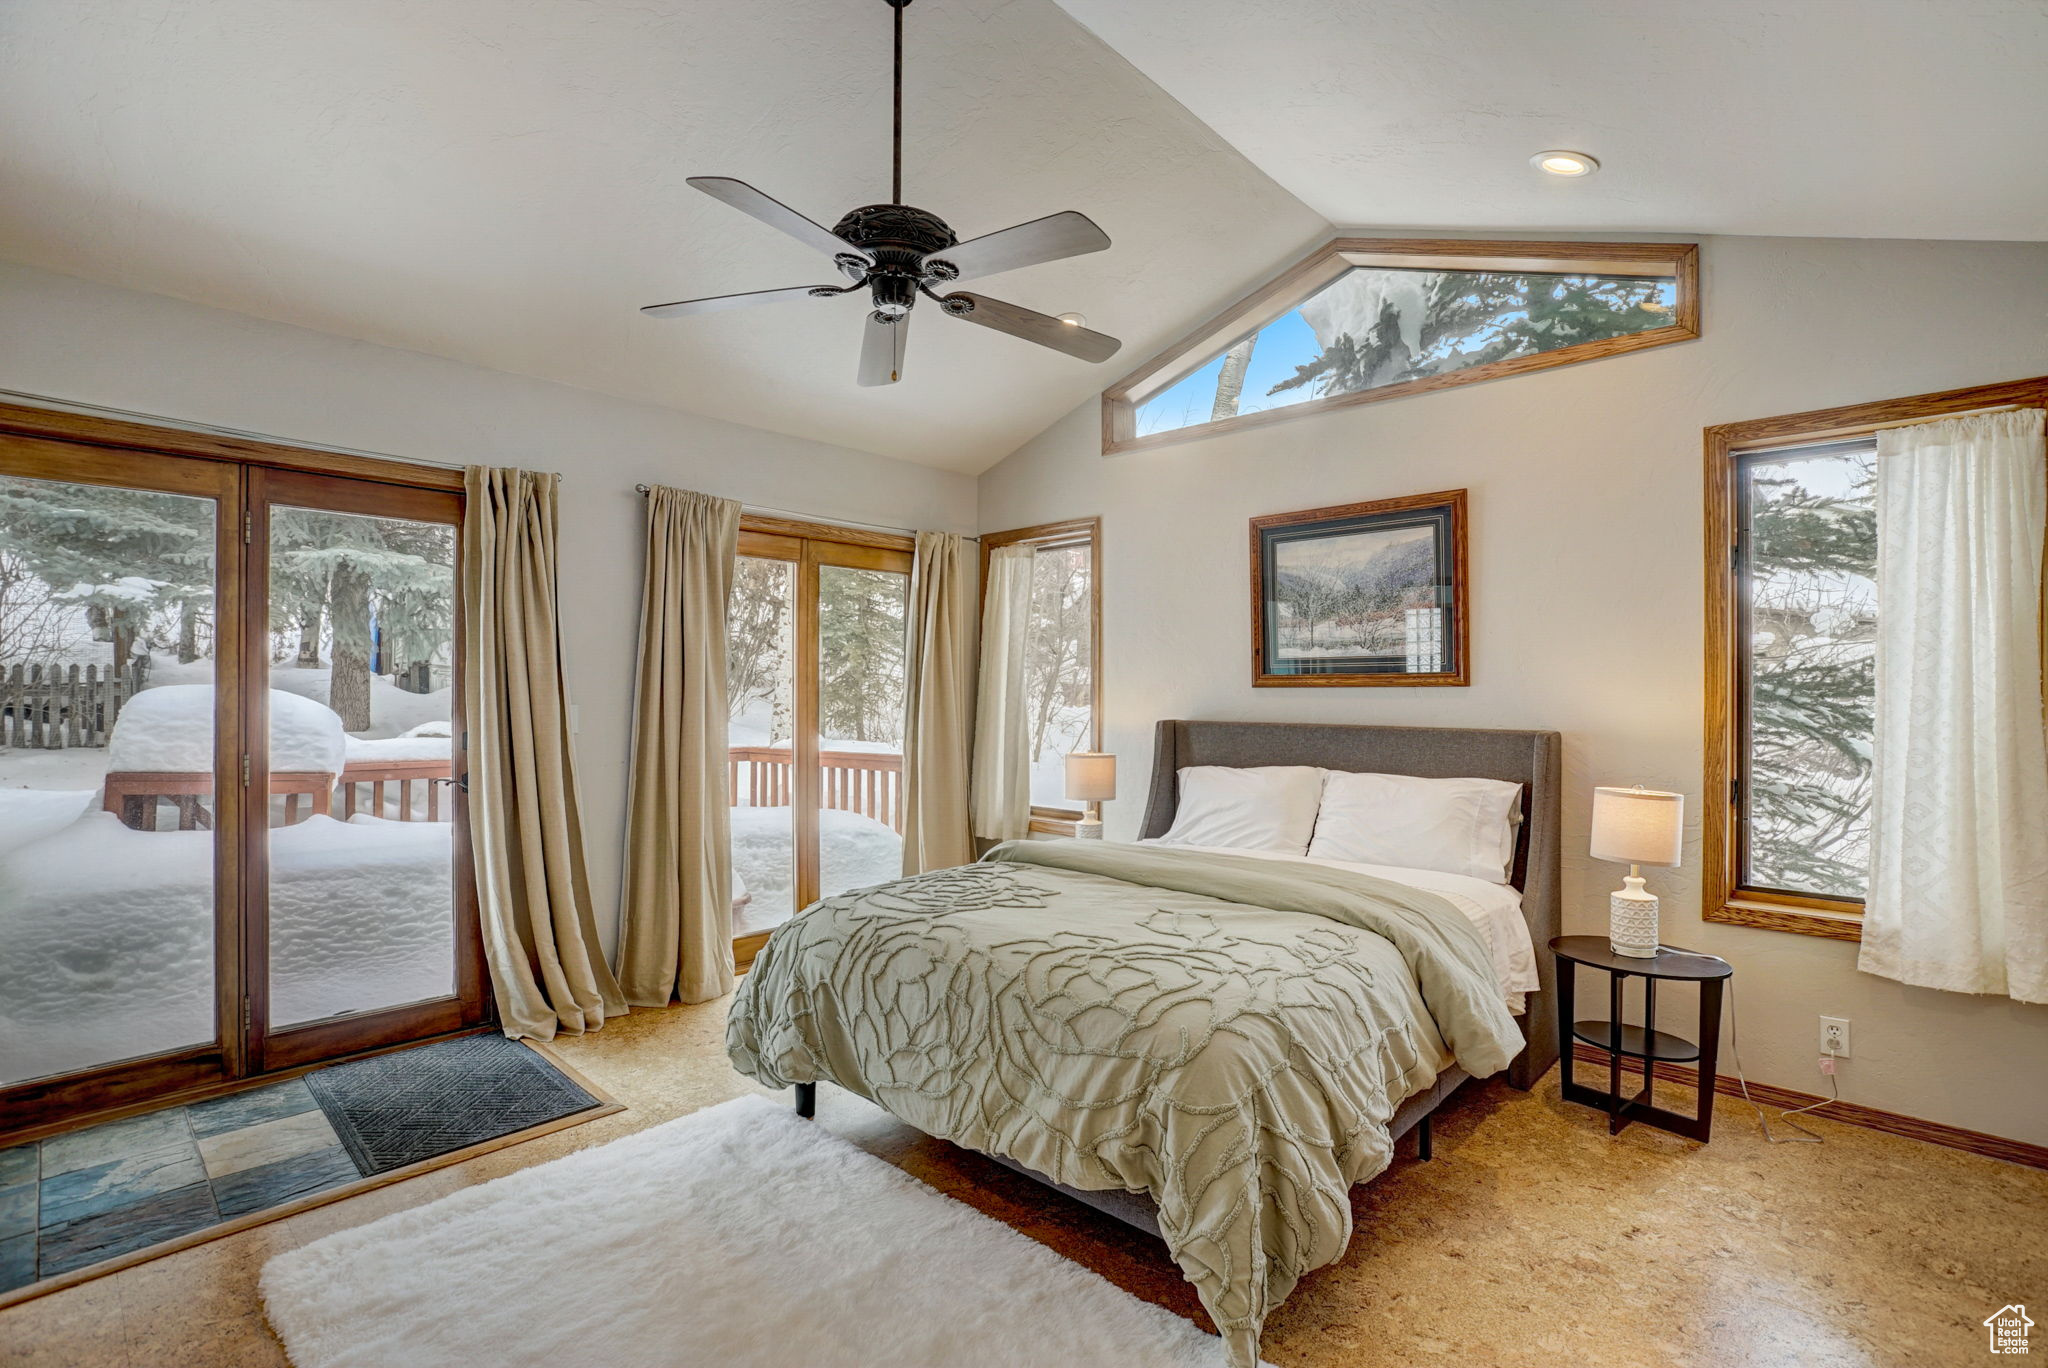 Bedroom with multiple windows, ceiling fan, and access to outside